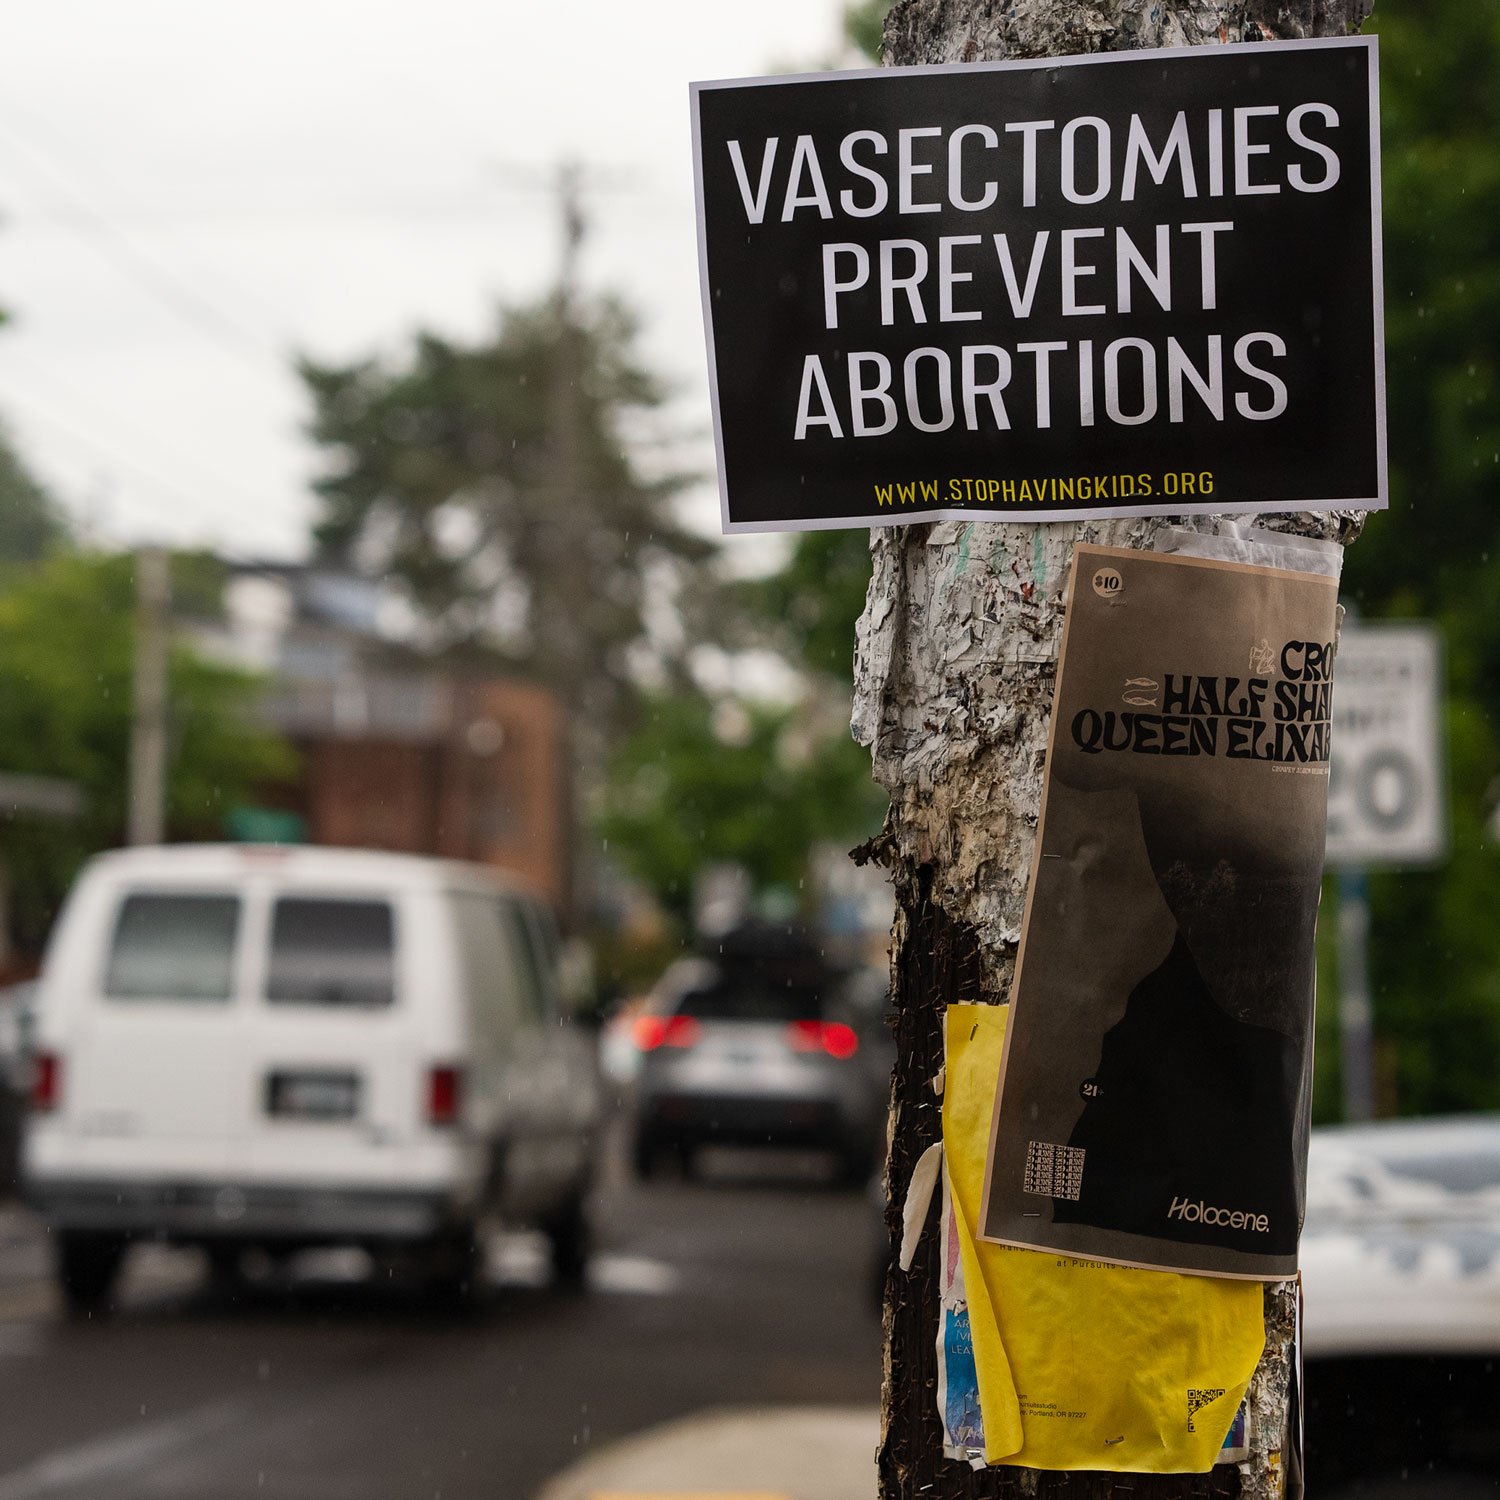 vasectomies-prevent-abortions.jpg